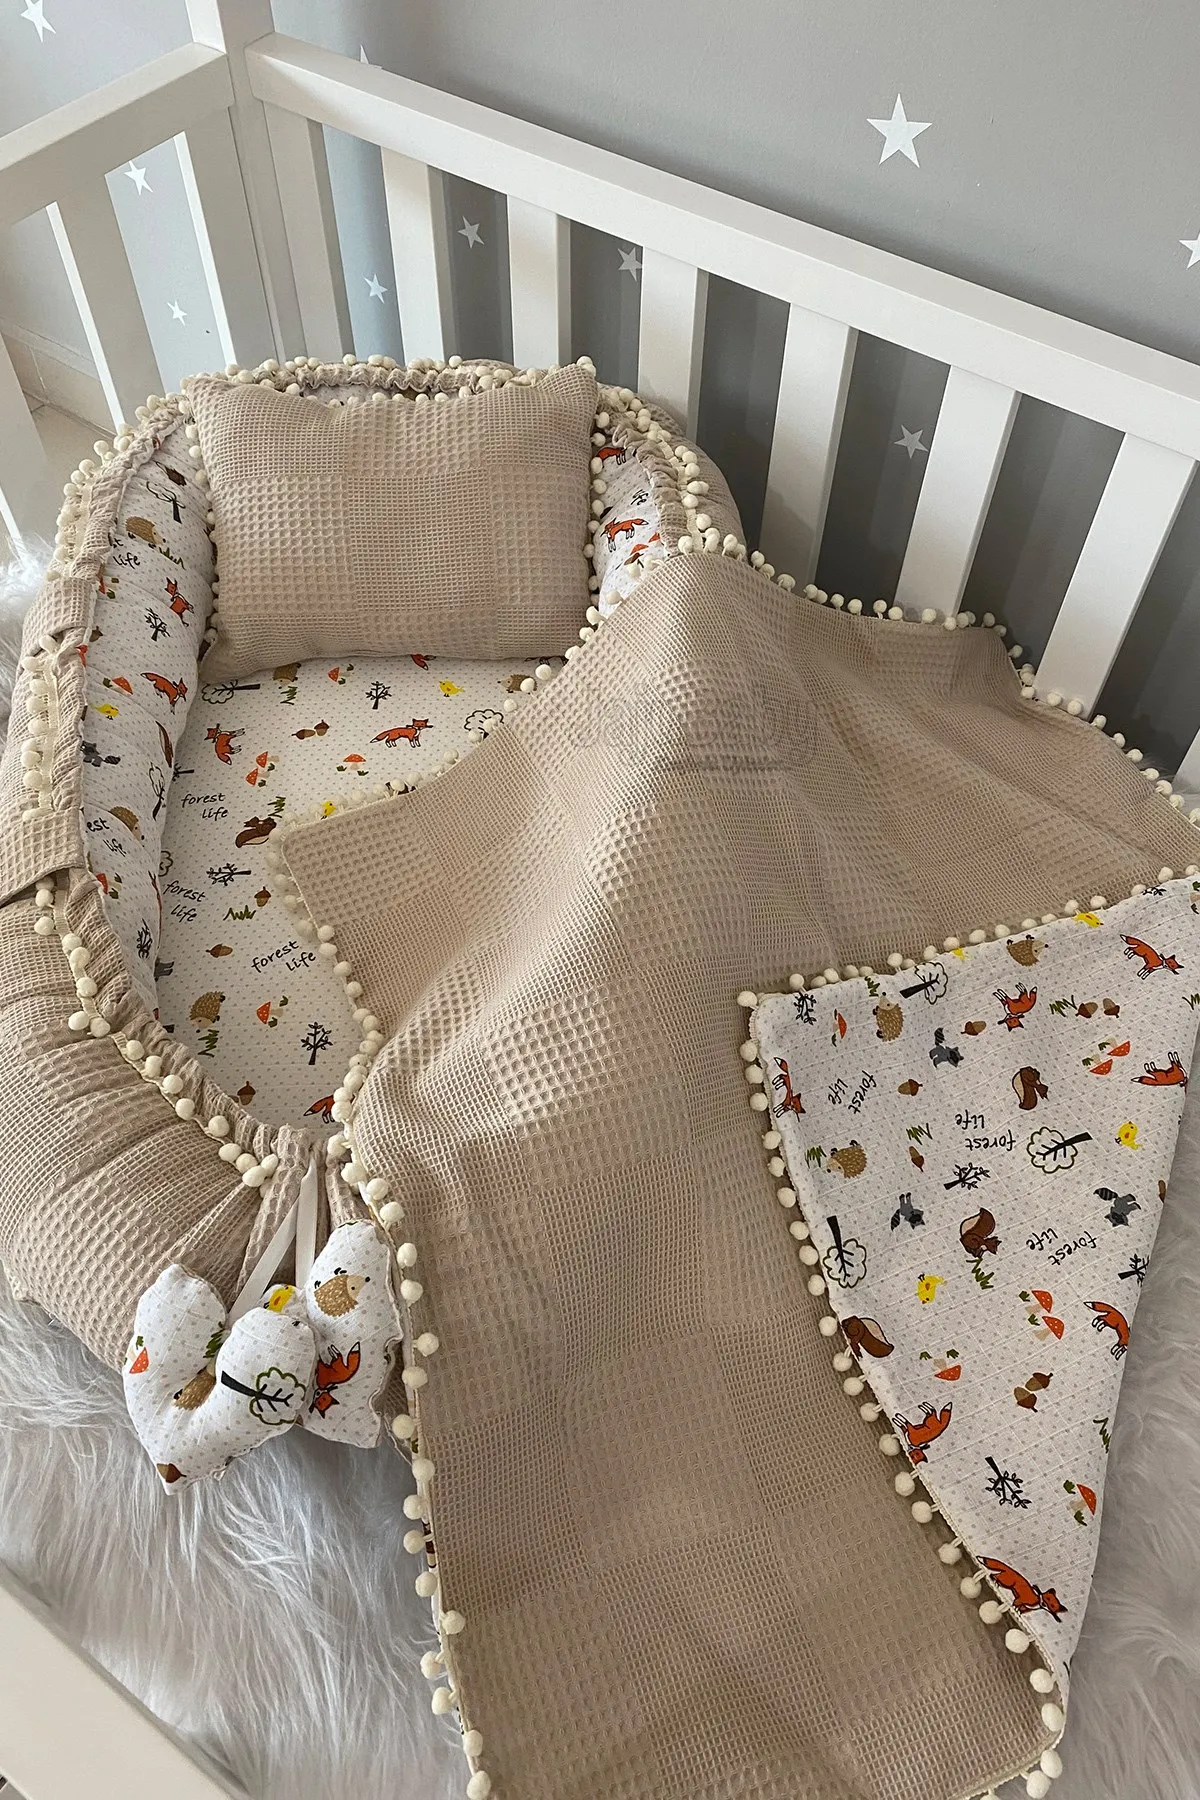 Jaju Baby Handmade Pique Fabric and Muslin Fabric Fox Design 3 Piece Babynest Set with Pompom Mother Side Portable Baby Bed